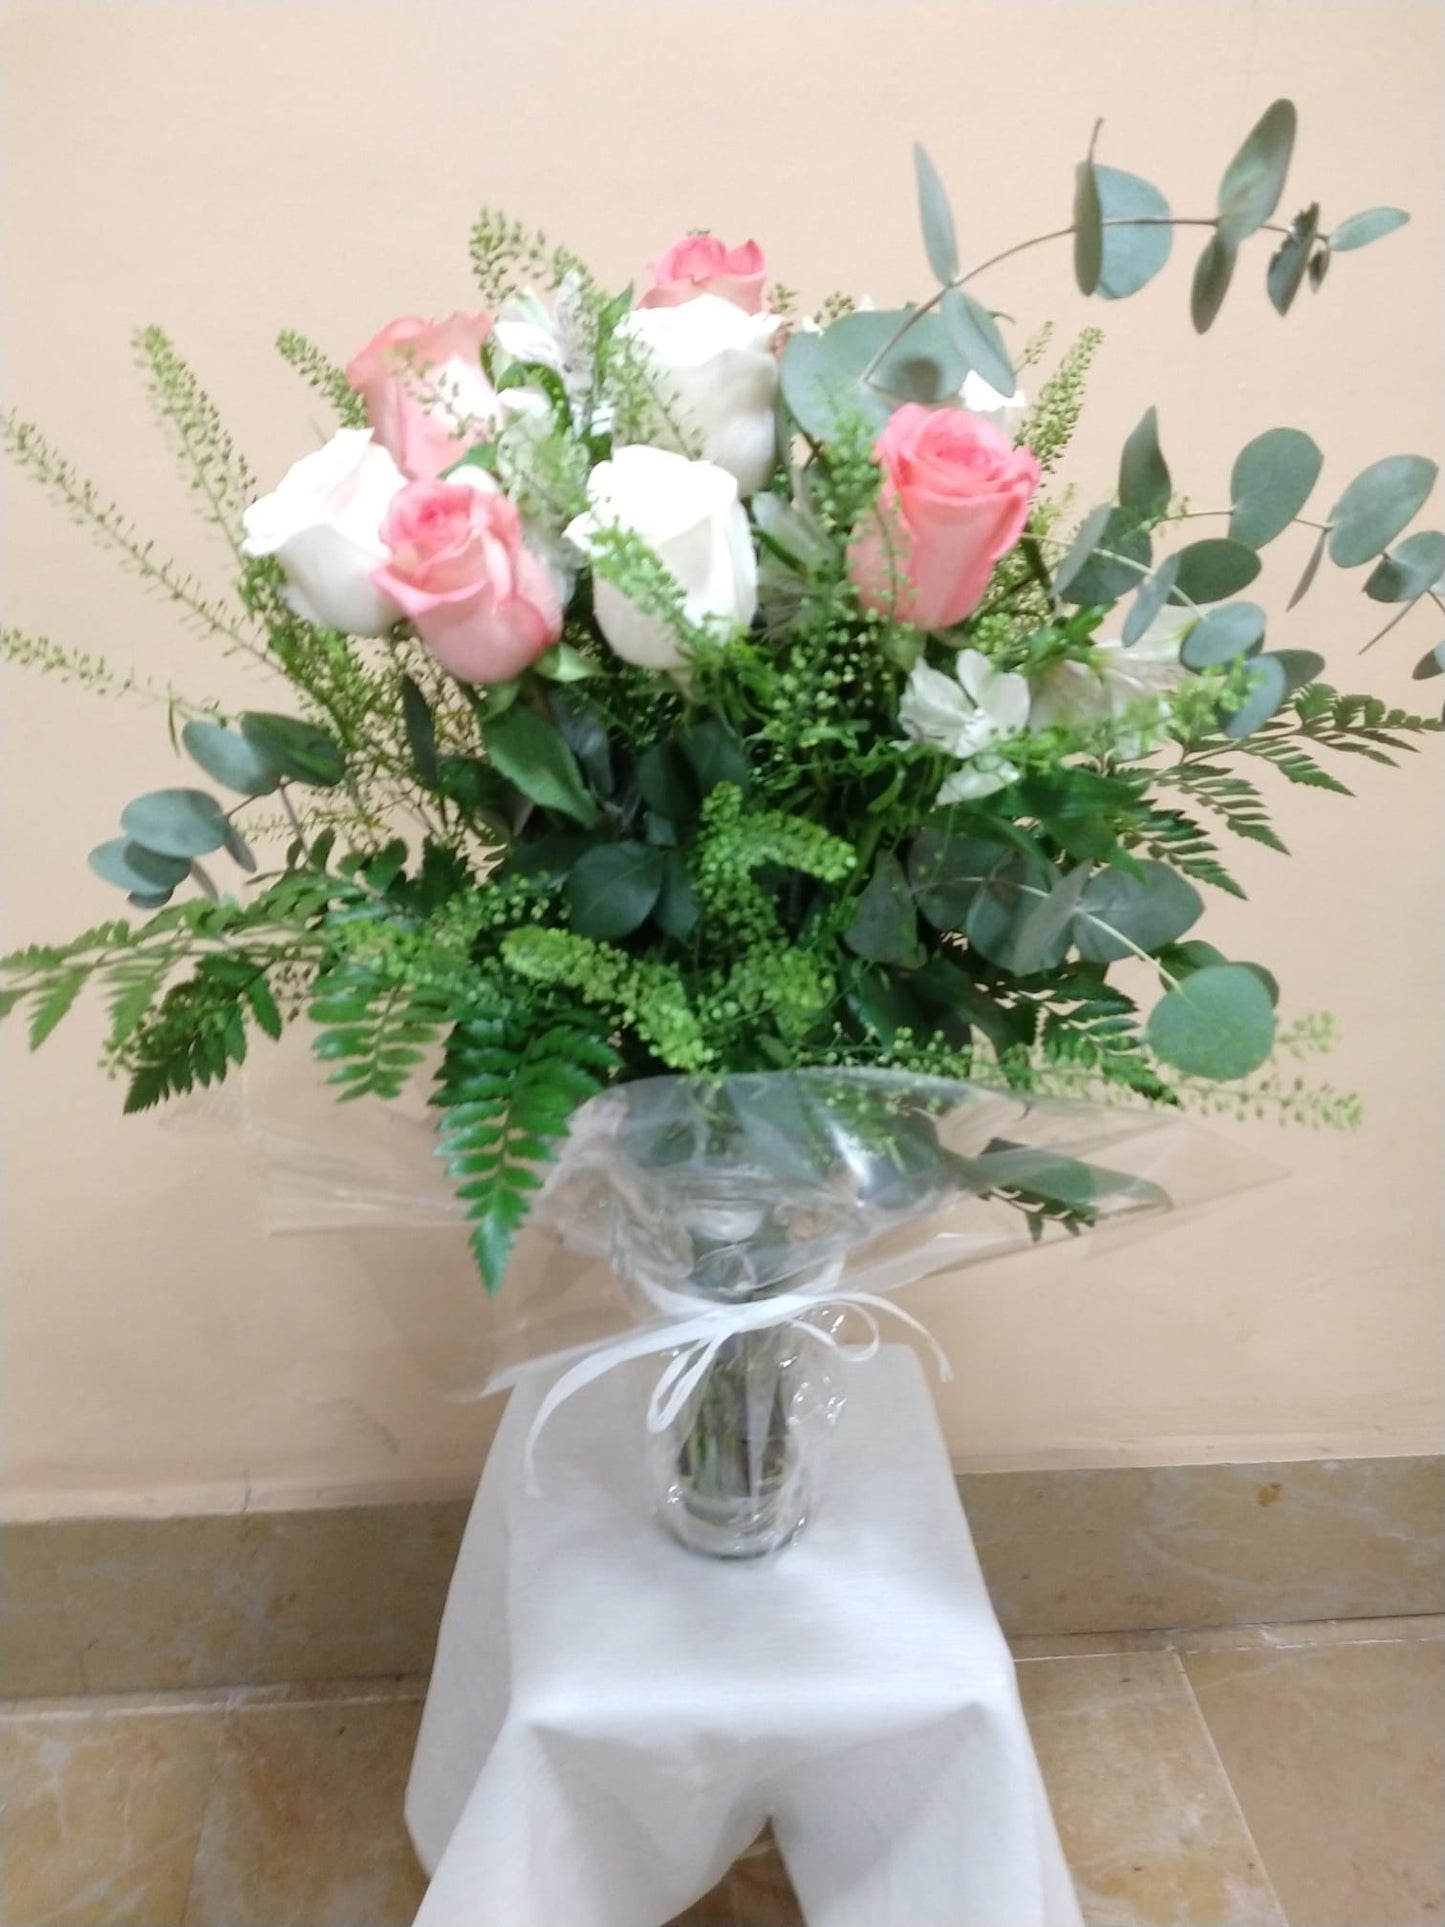 Bouquet of white and pink roses